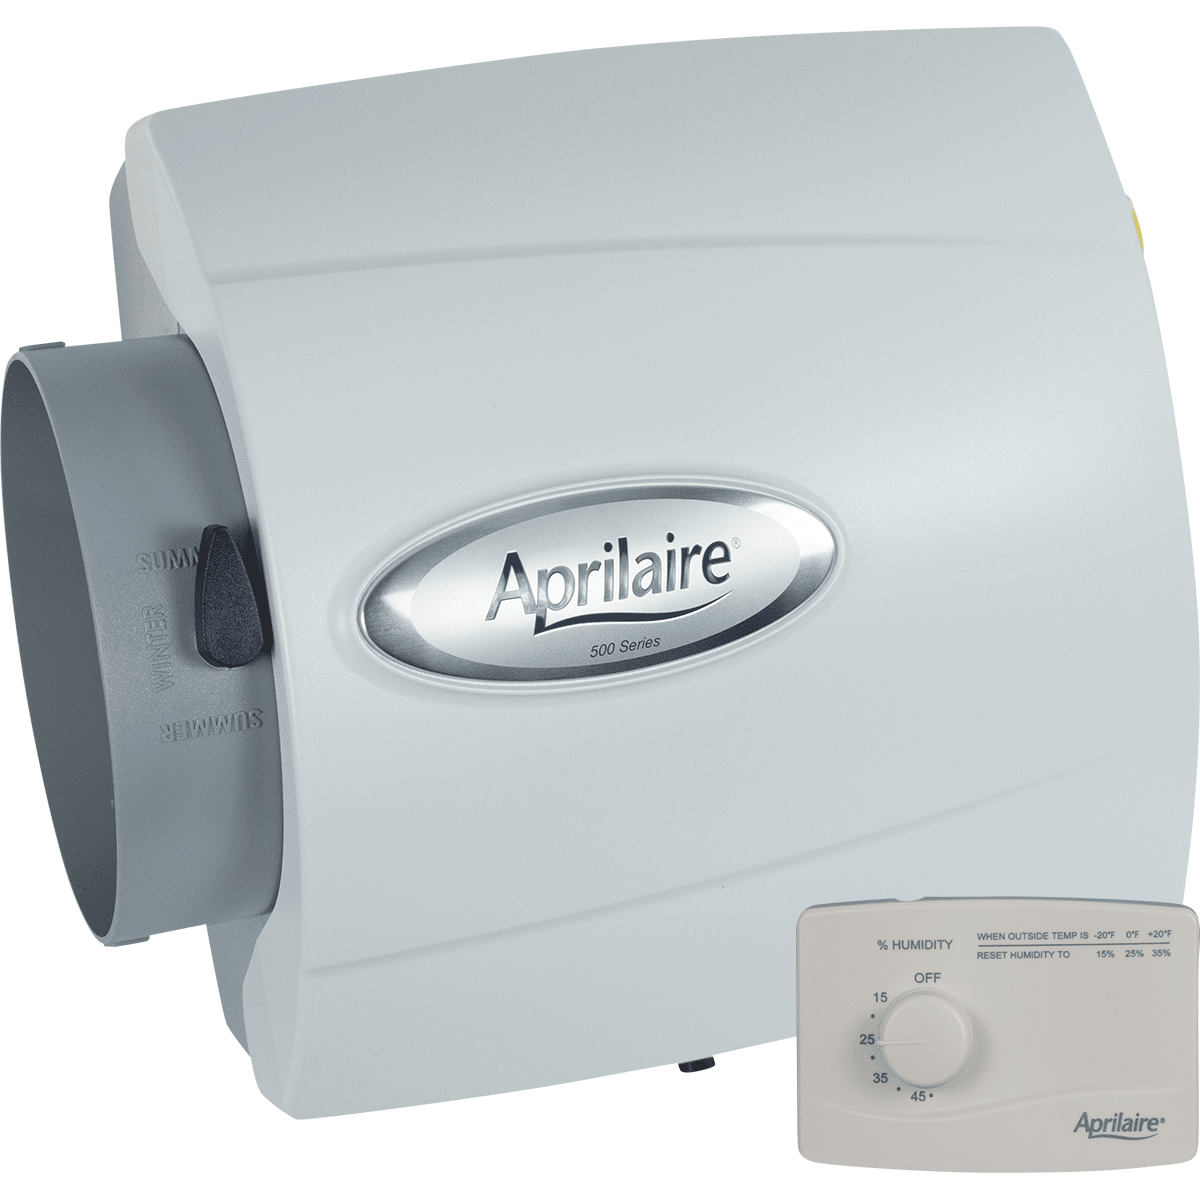 Aprilaire 500 Small Bypass Humidifier - Manual Control